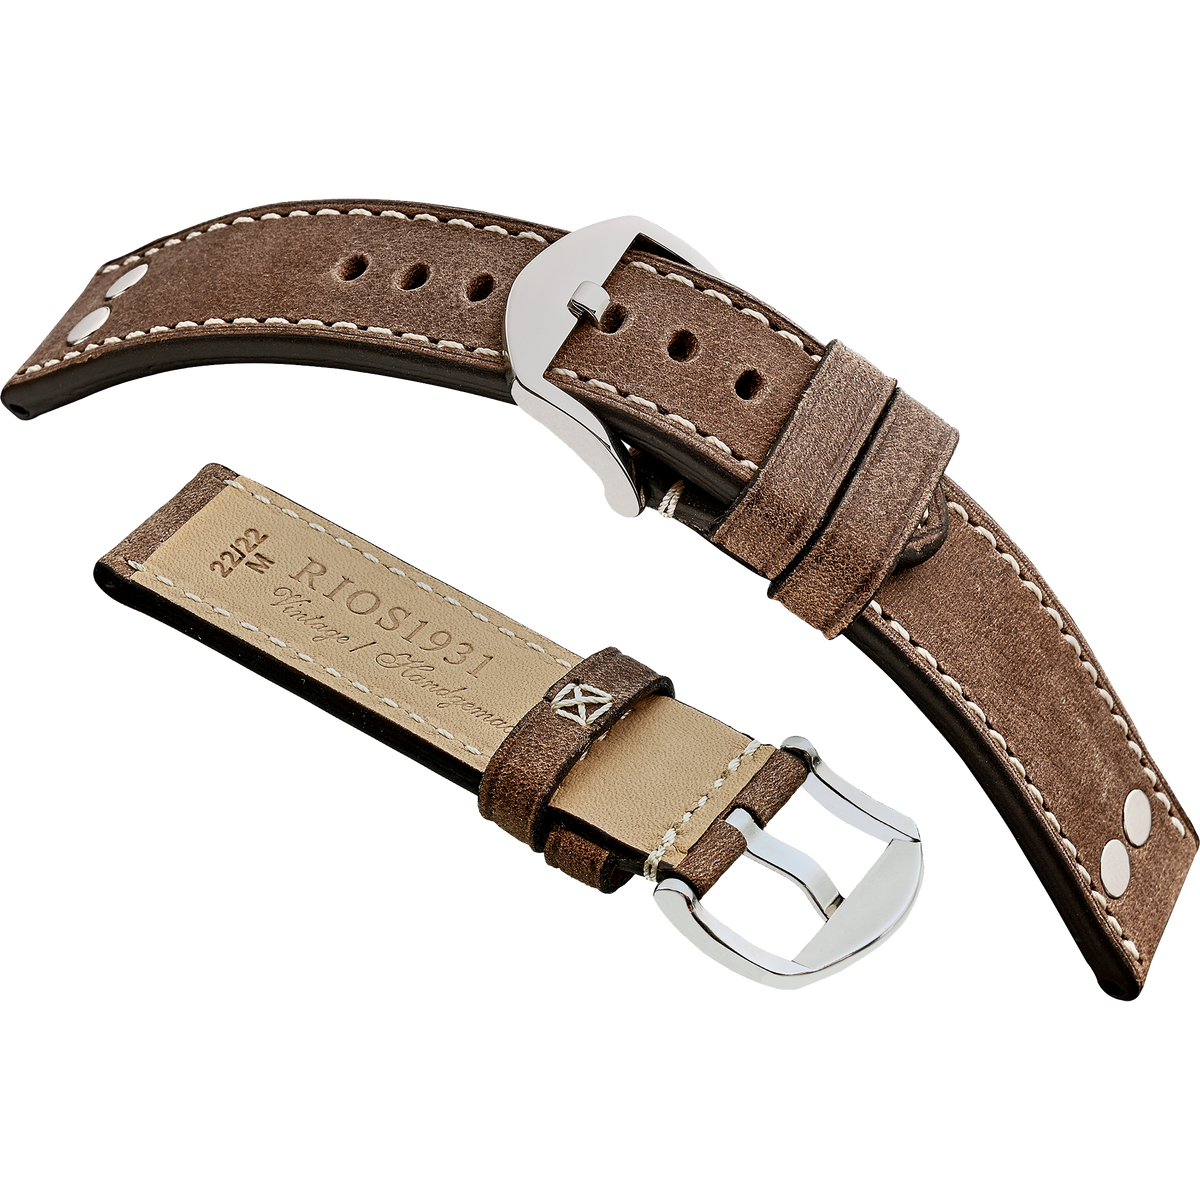 Rios 1931 Watch Bands - Chesterfield - Genuine Vintage Leather